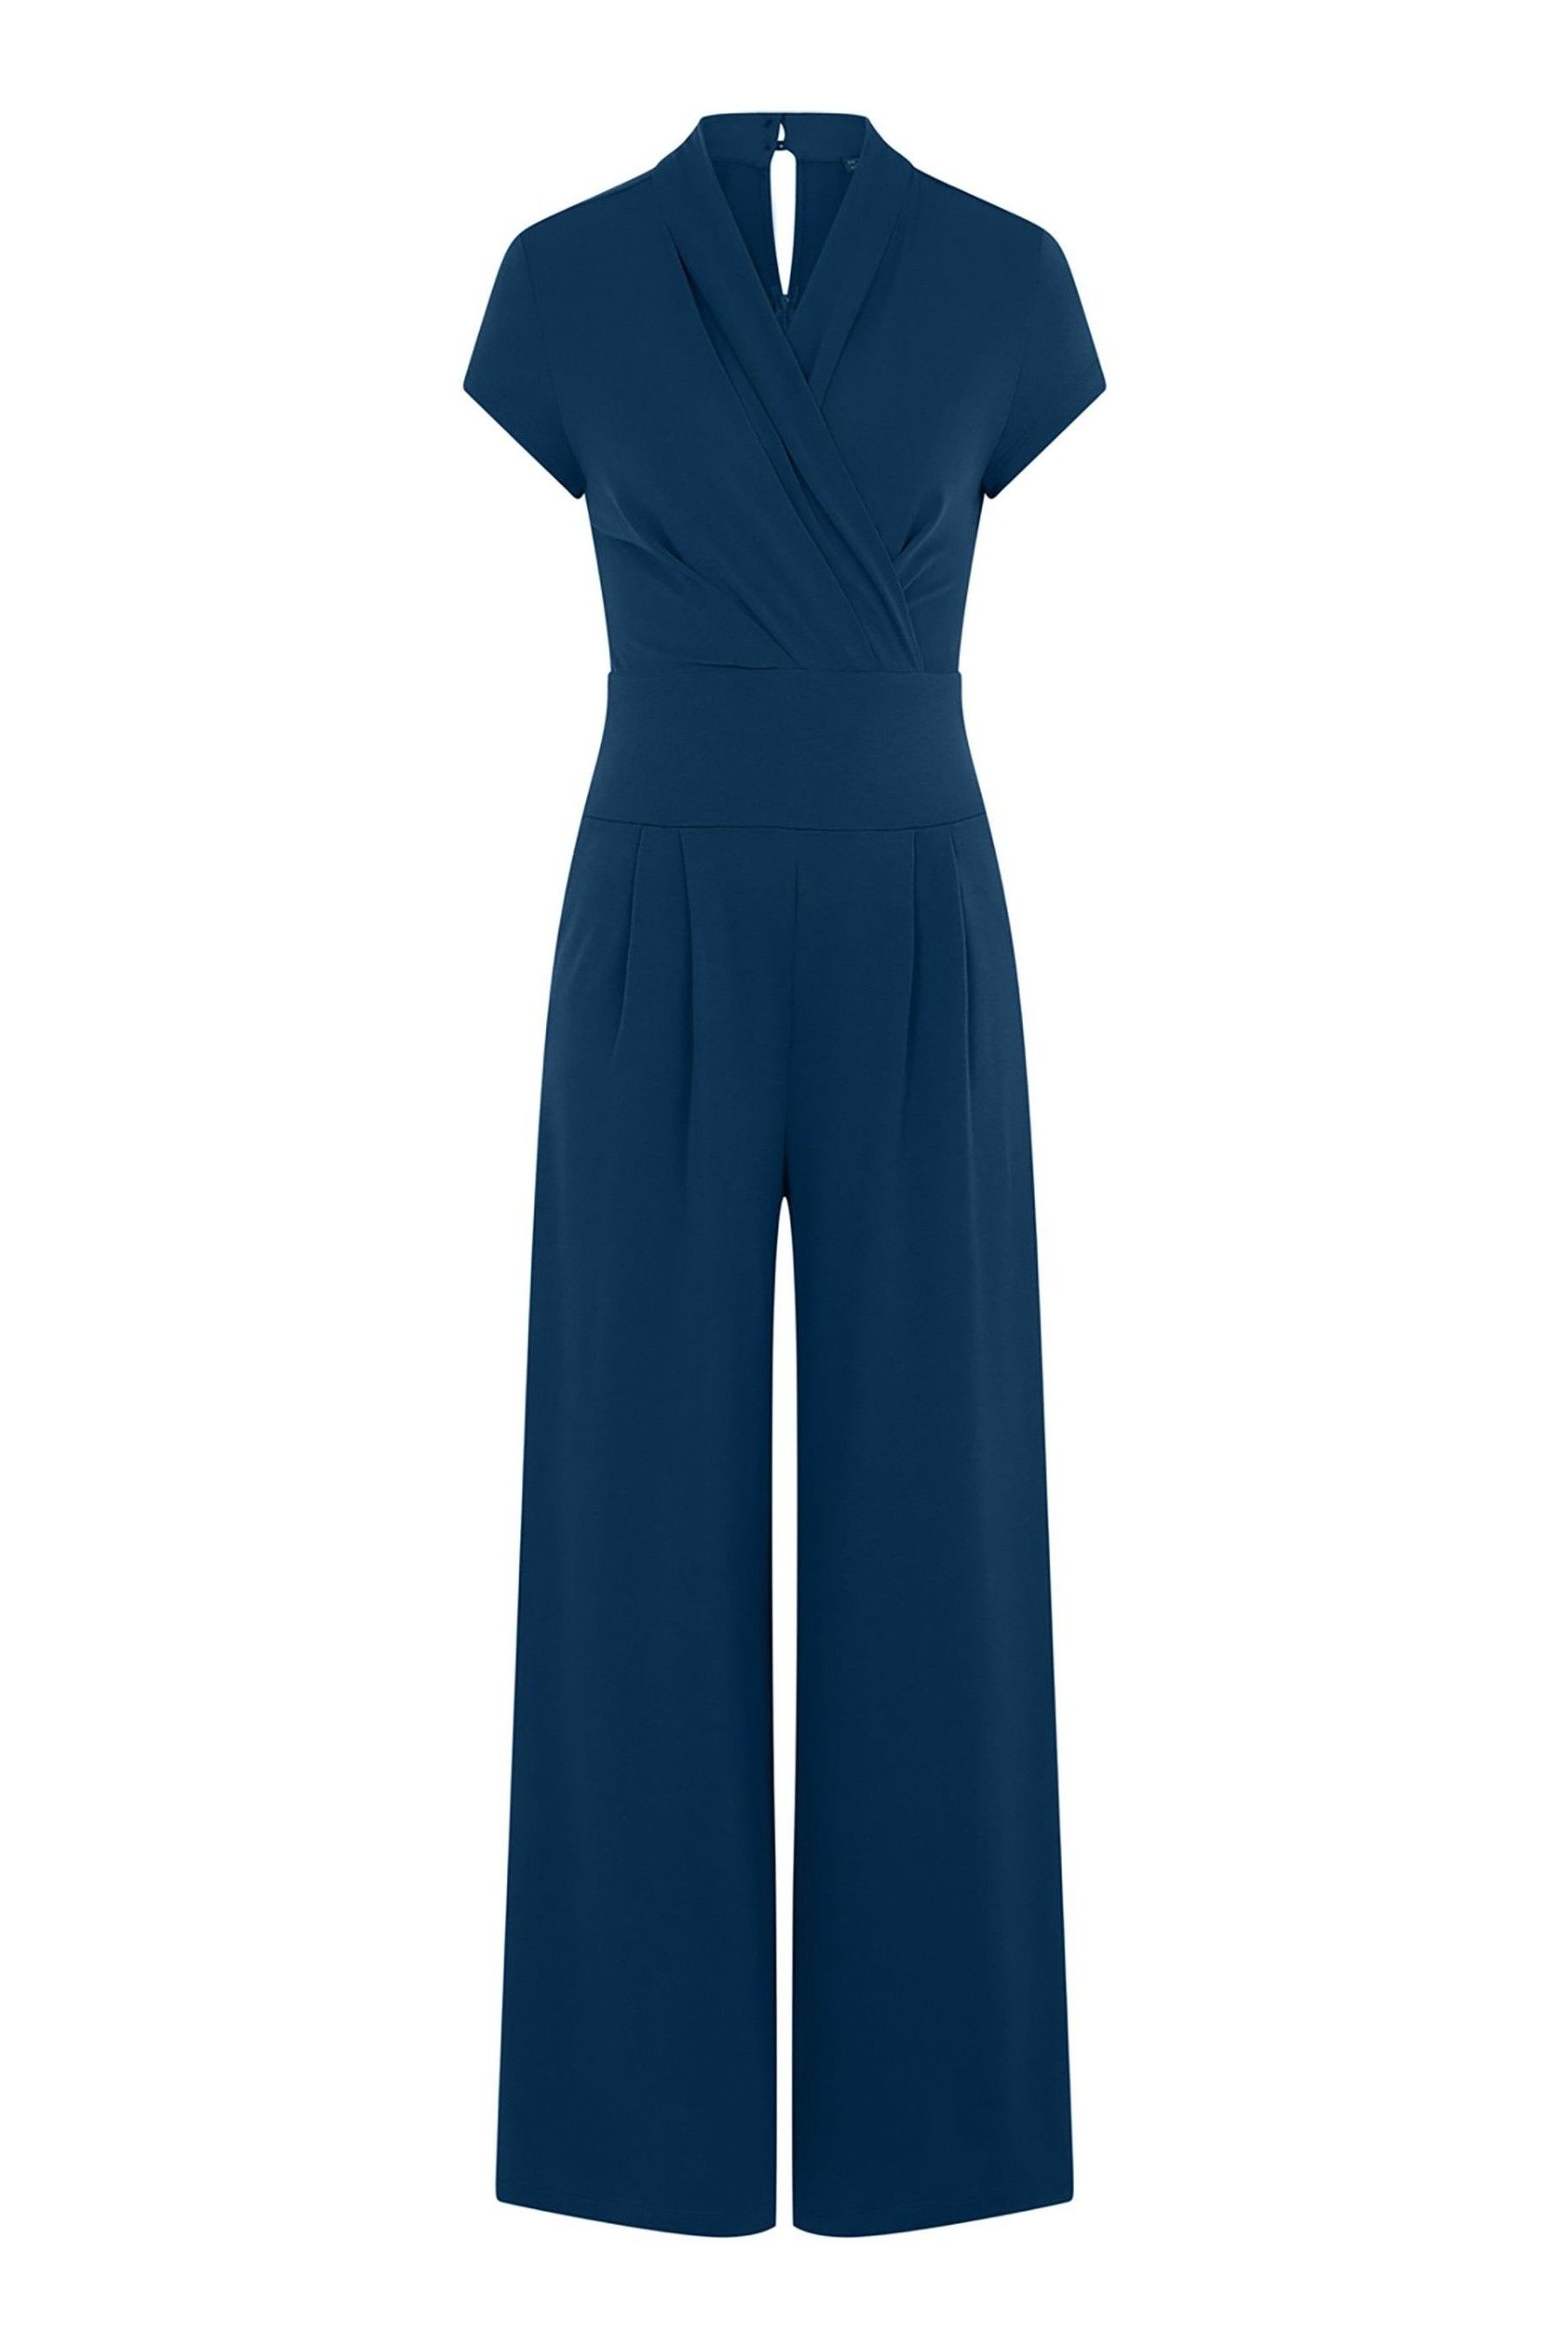 Buy HotSquash Teal Blue Cap Sleeved Wide Leg Jumpsuit from the Next UK ...